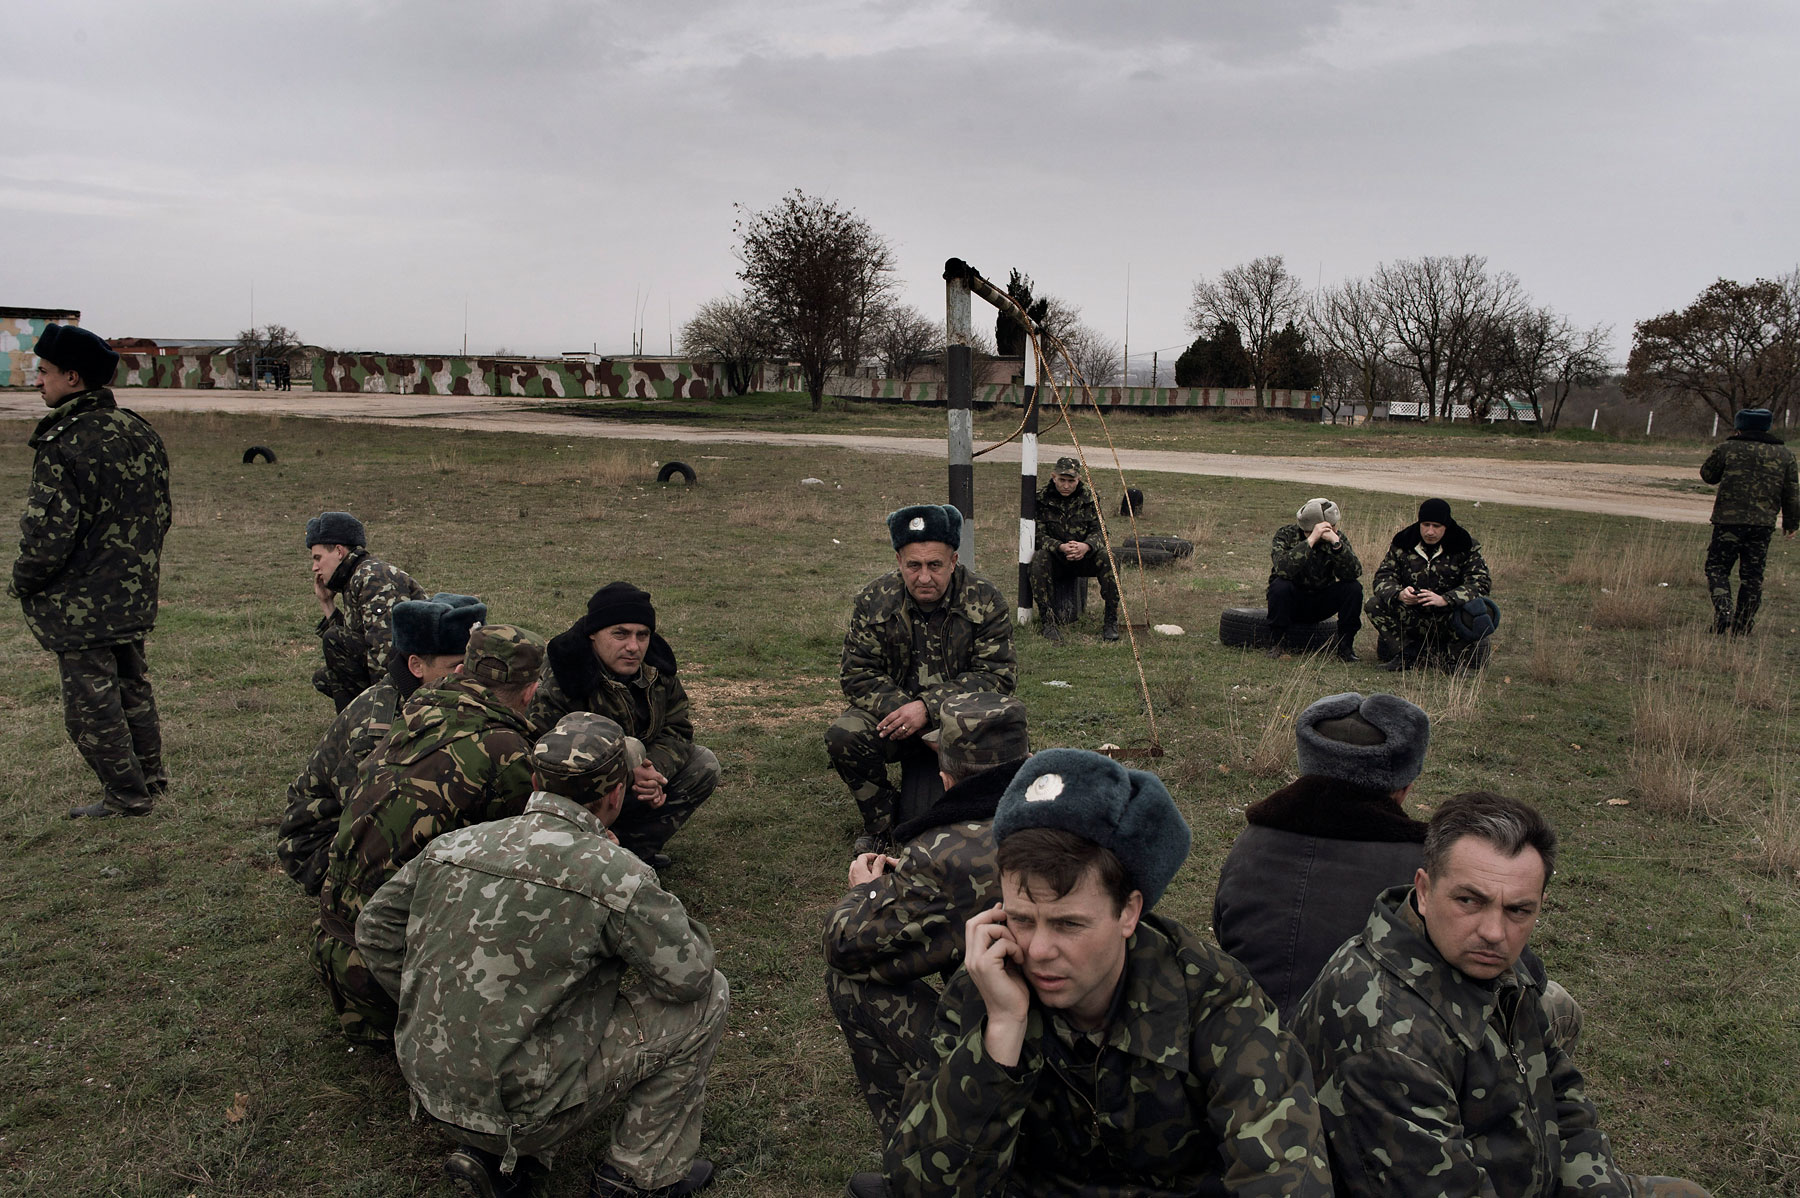 Ukrainian soldiers at the Belbek air force base in Crimea, March 4, 2014. (Yuri Kozyrev—NOOR for TIME)